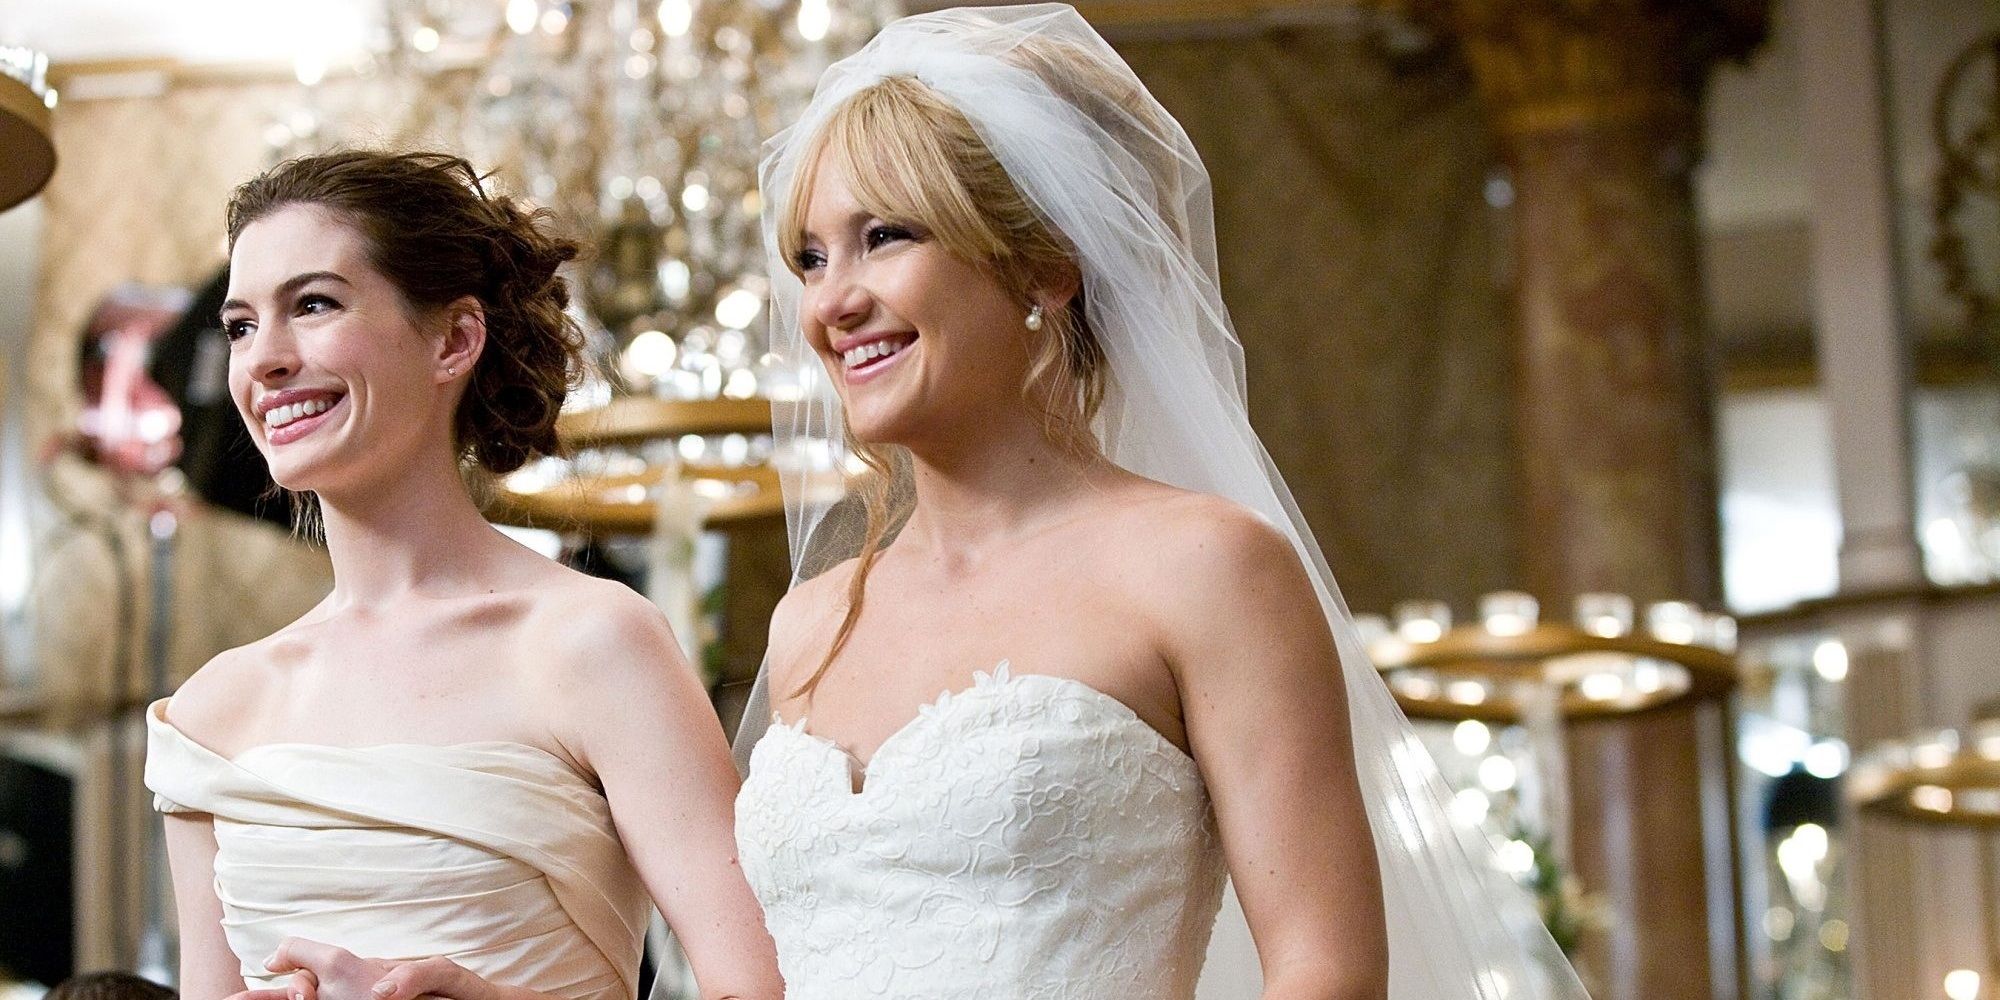 A bride and bridesmaid stand together in Bride Wars